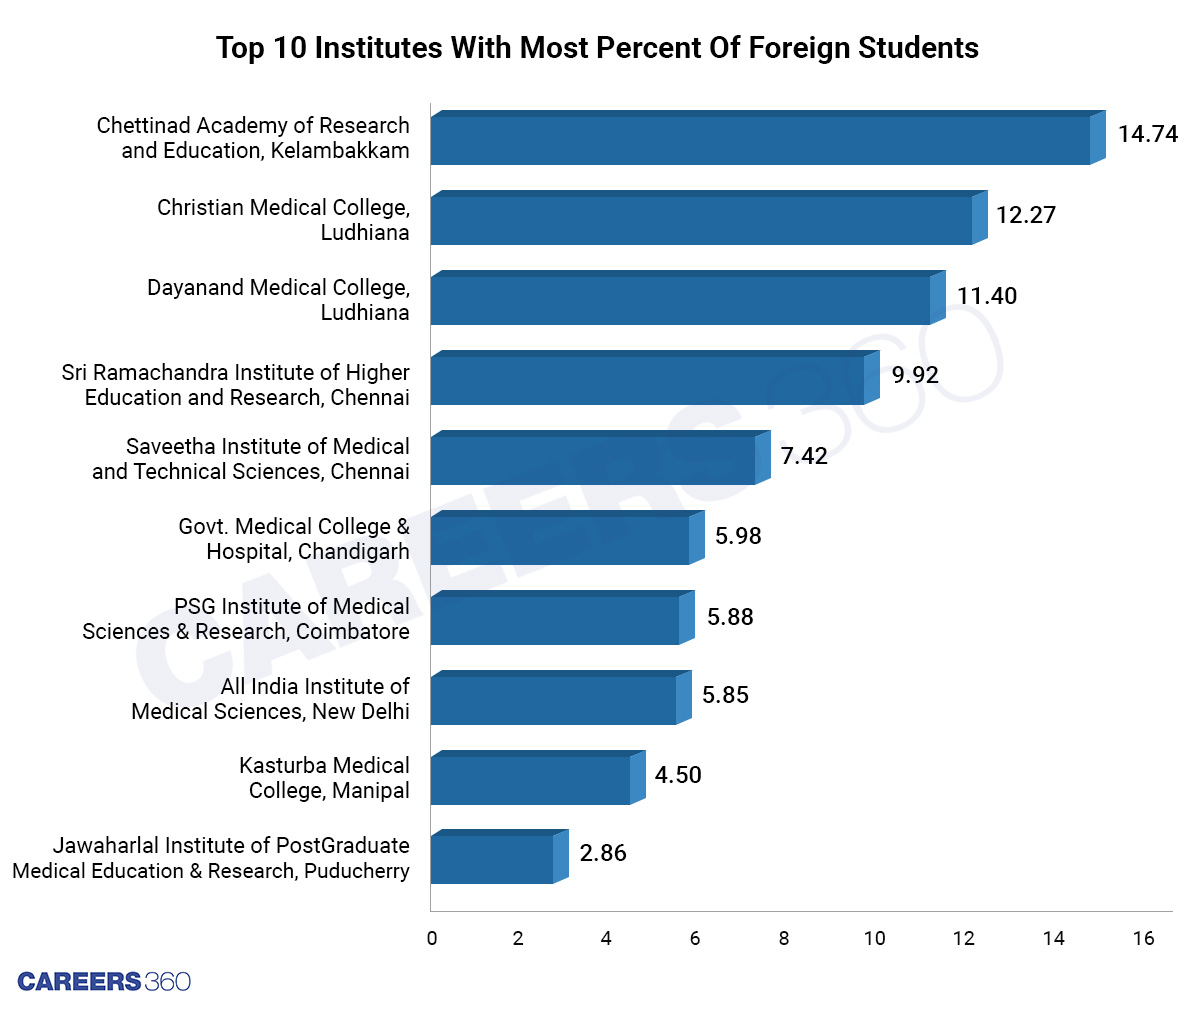 Top 10 Medical Institutes: Foreign Students